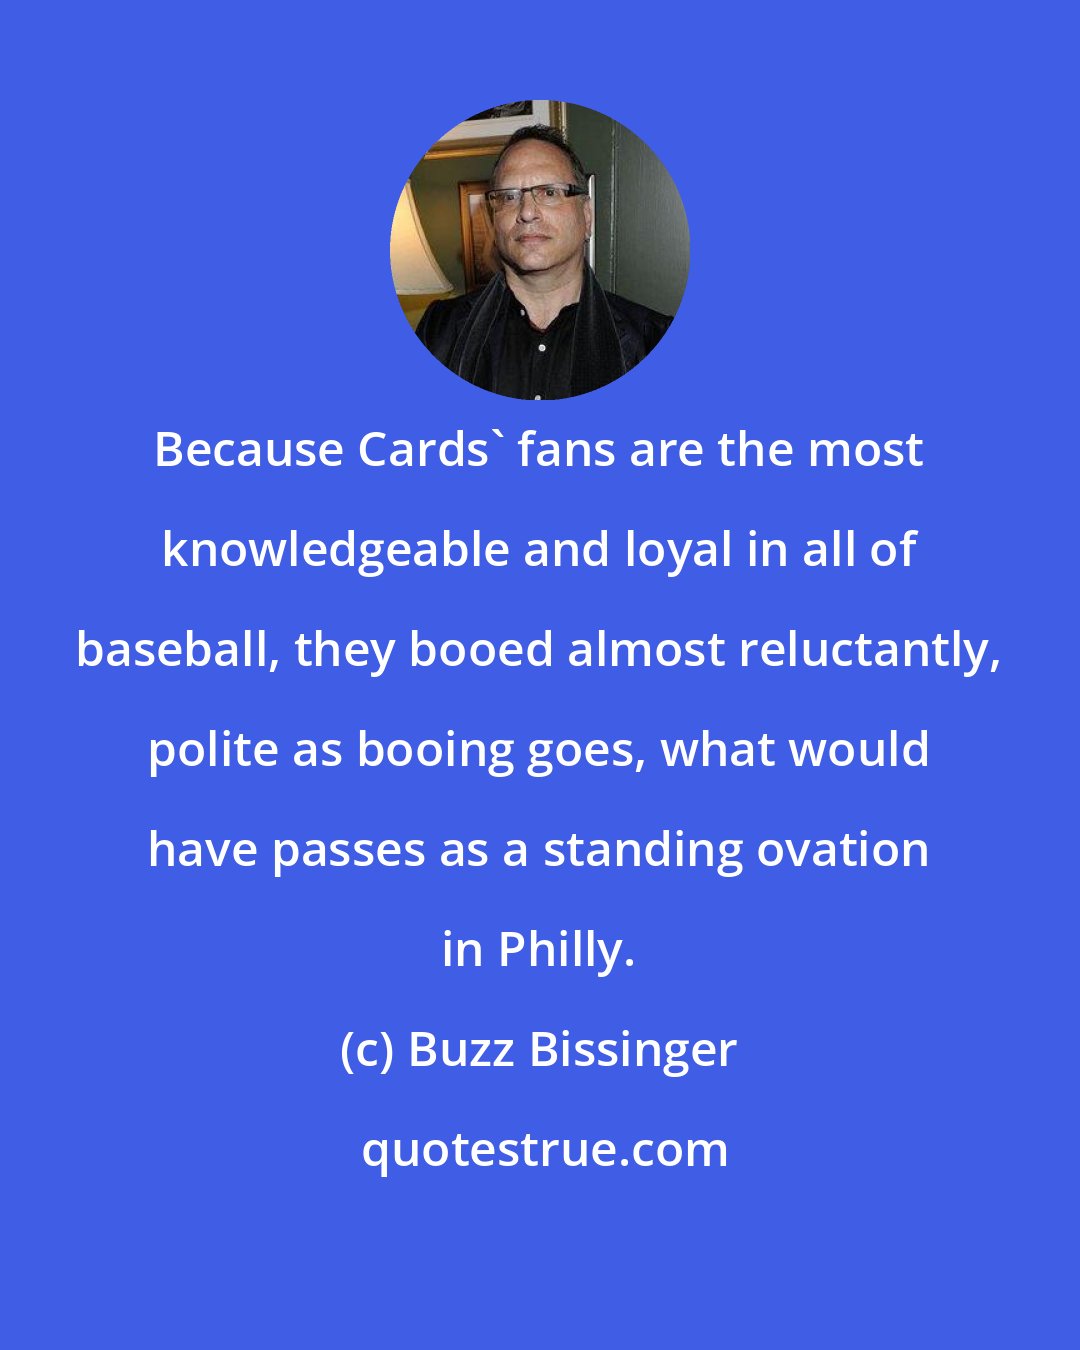 Buzz Bissinger: Because Cards' fans are the most knowledgeable and loyal in all of baseball, they booed almost reluctantly, polite as booing goes, what would have passes as a standing ovation in Philly.